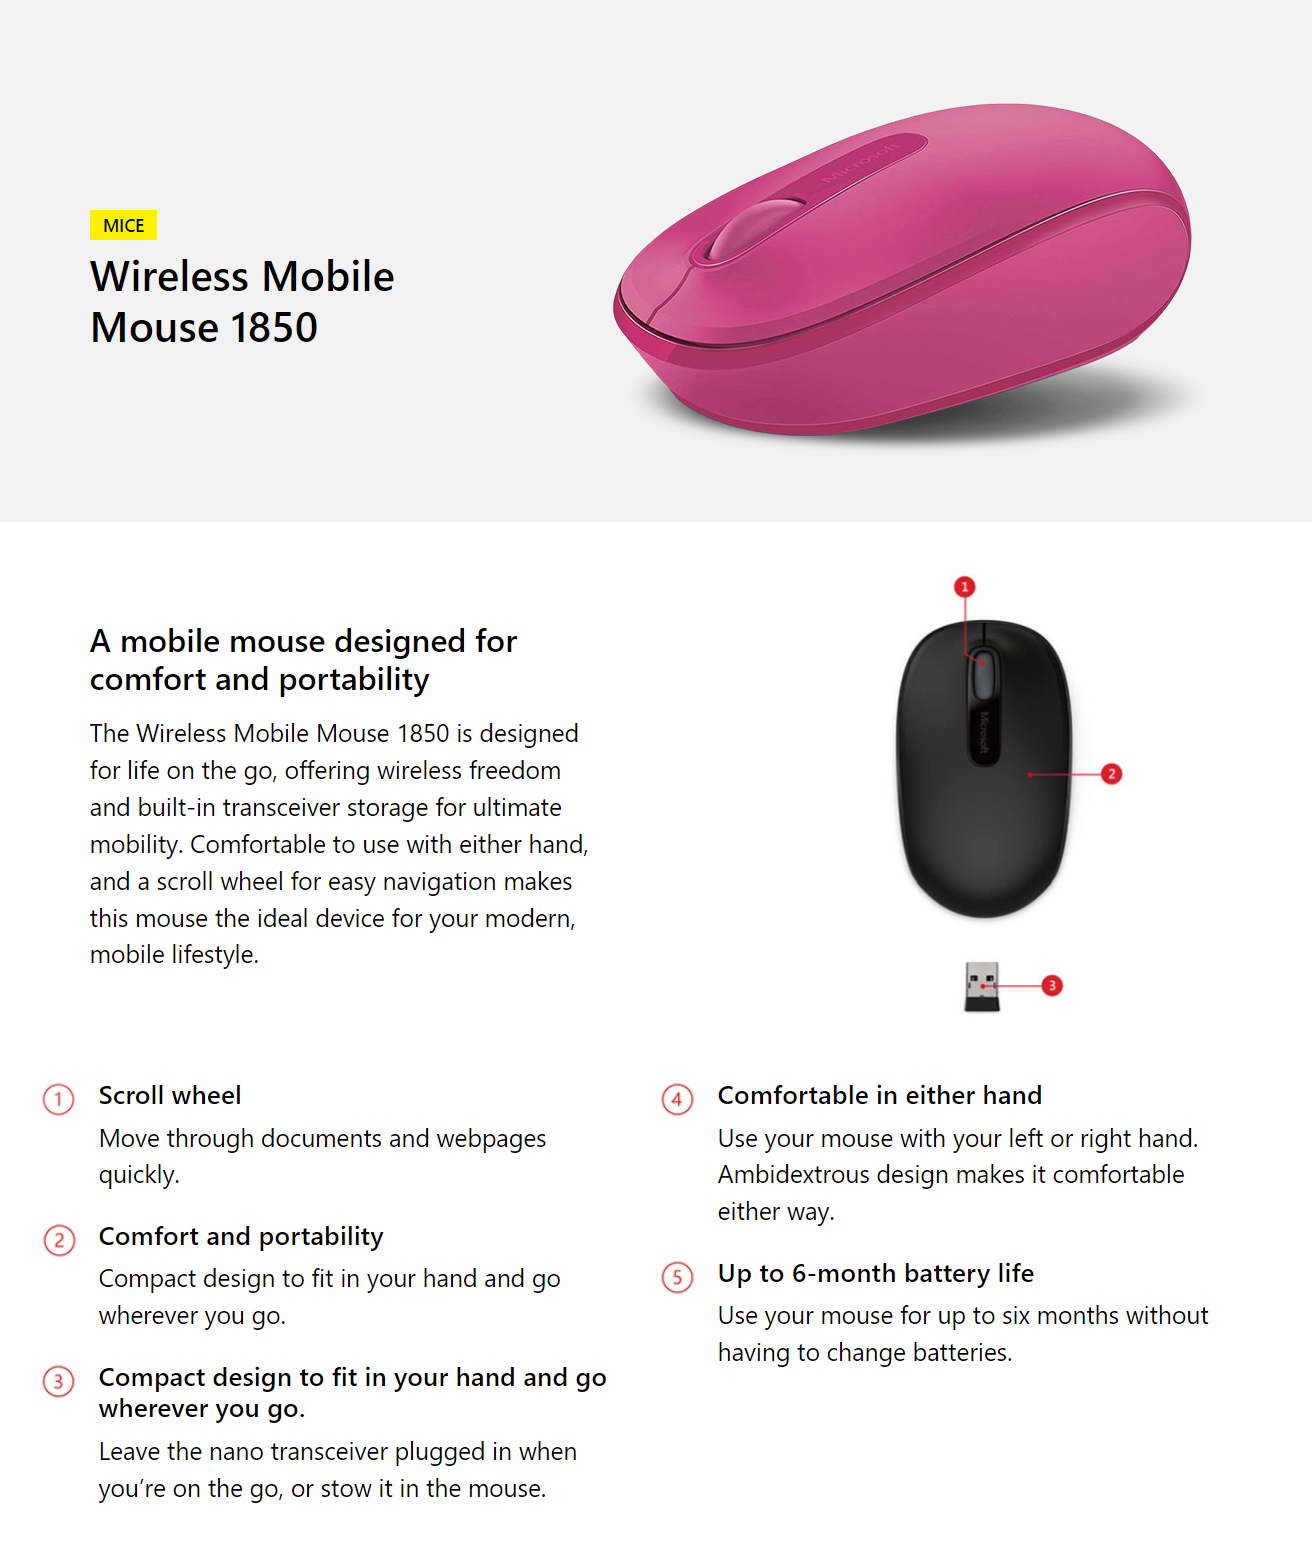 Microsoft-Wireless-Mobile-Mouse-1850-Magenta-Pink-1